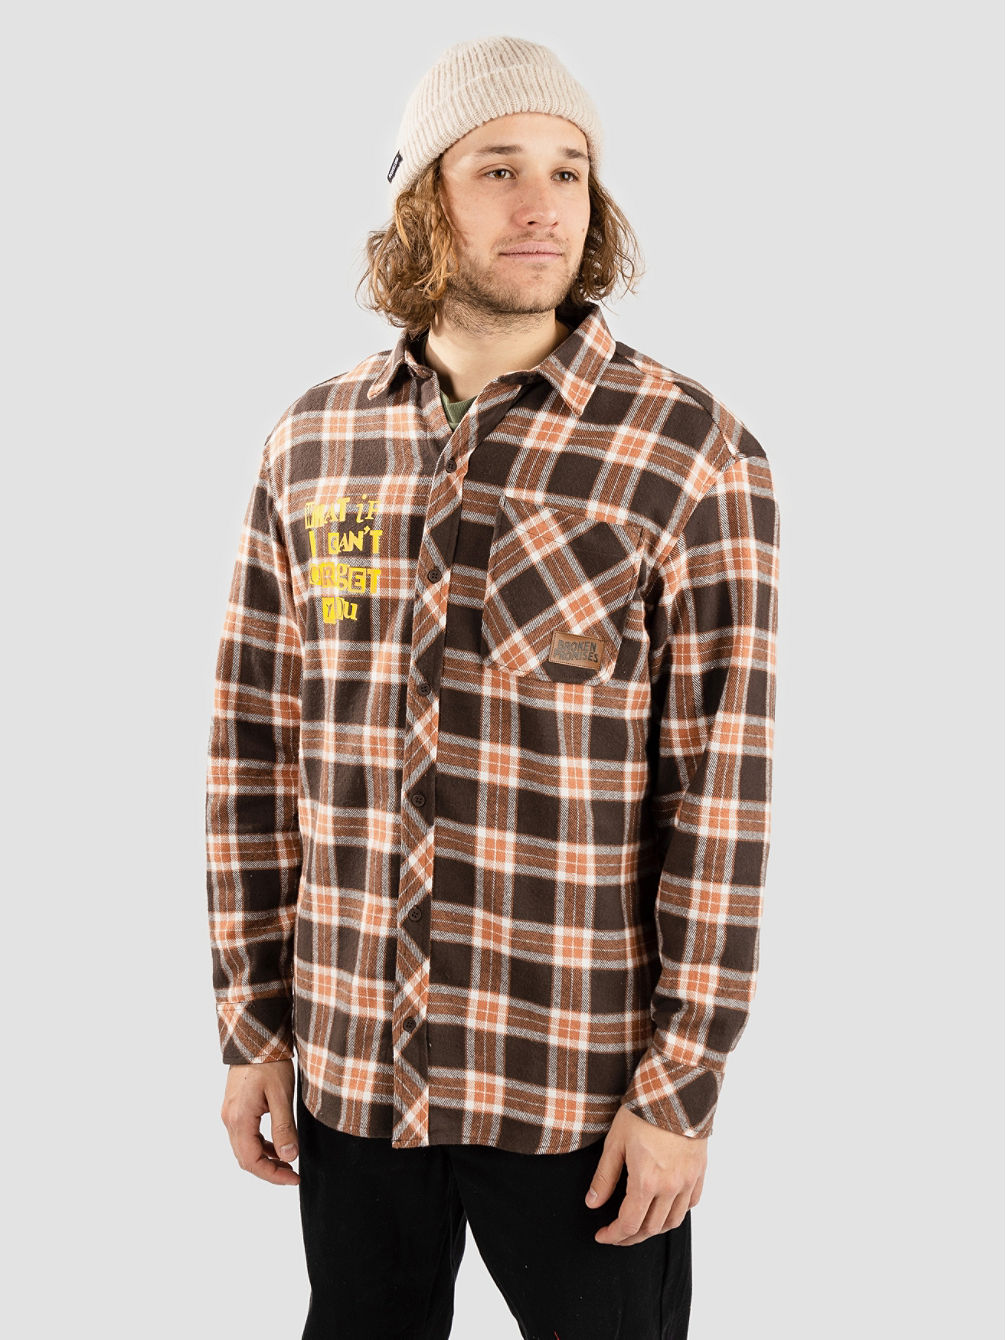 Forget You Printed Flannel Shirt